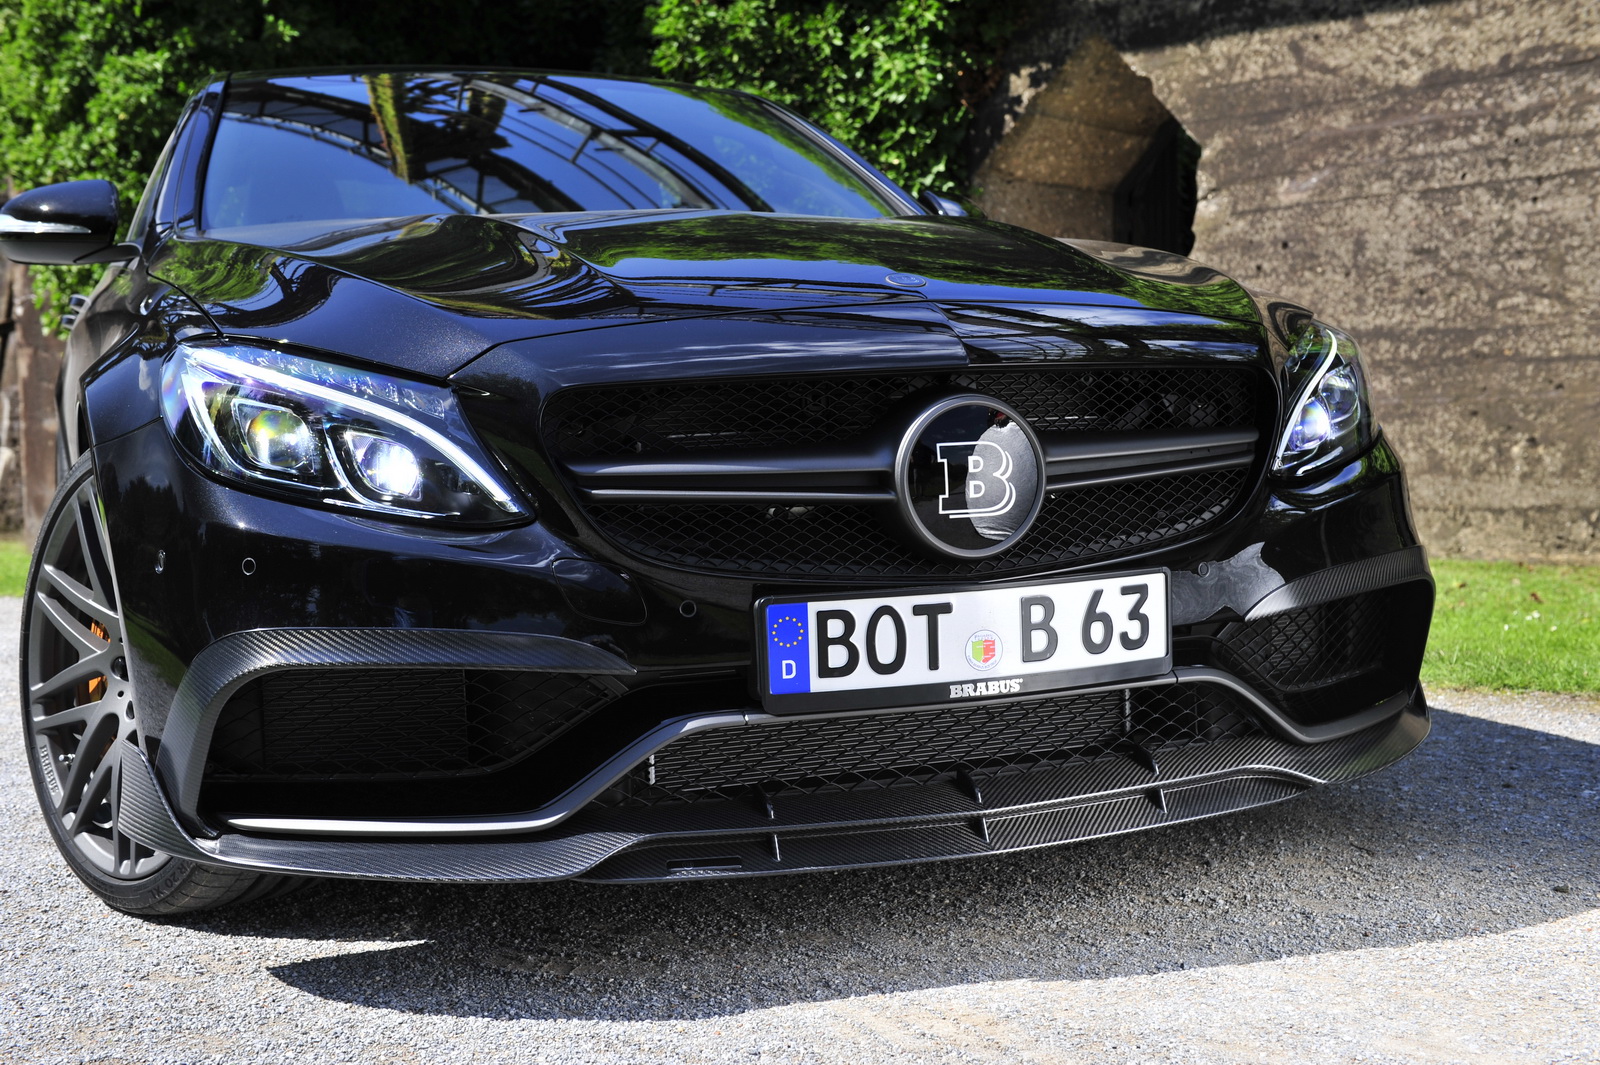 Brabus tuned Mercedes-AMG C63 S gets 591 bhp and supercar